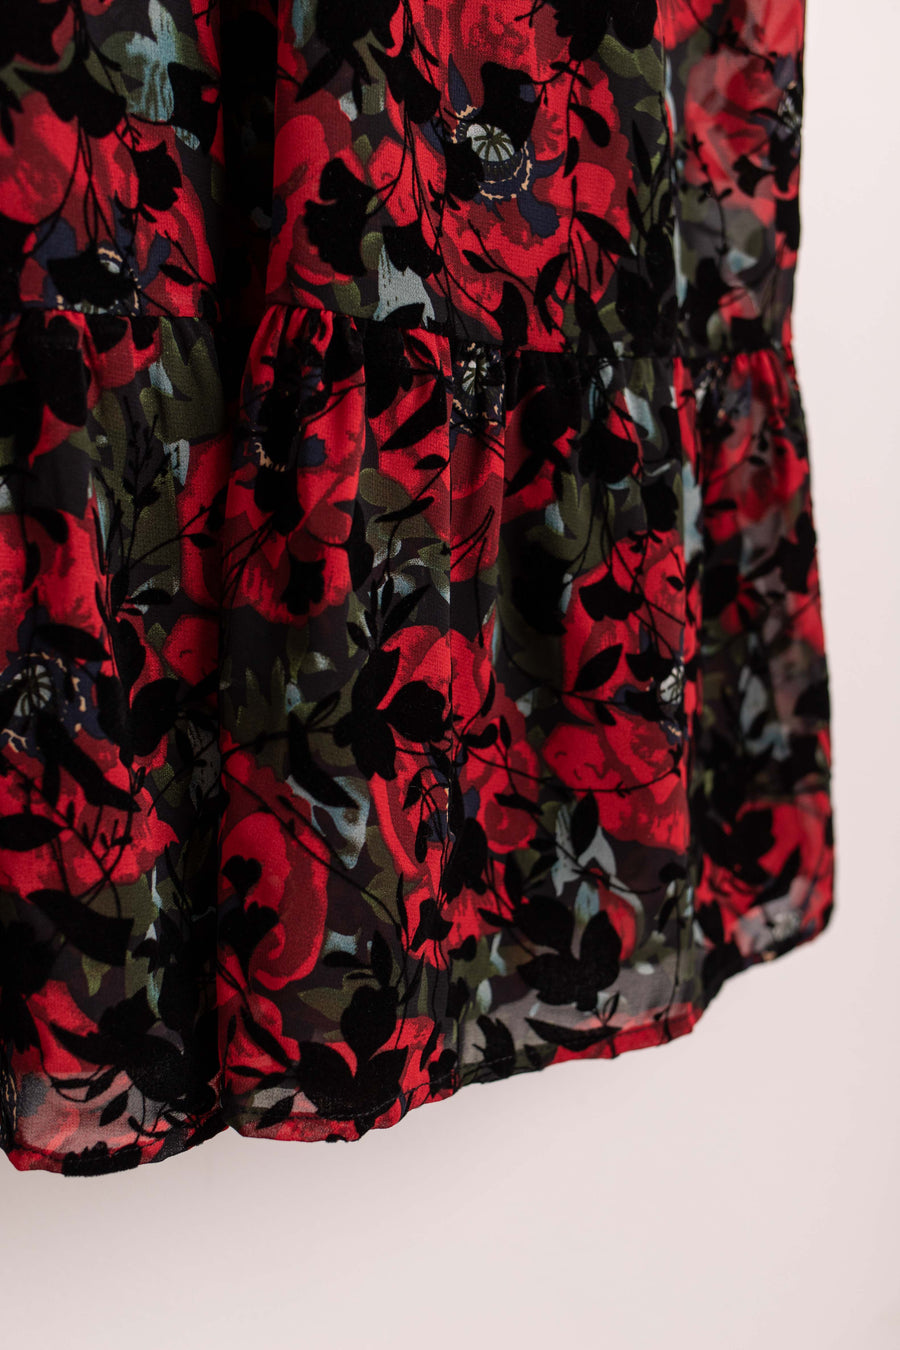 jackieandkate Rock floral rot